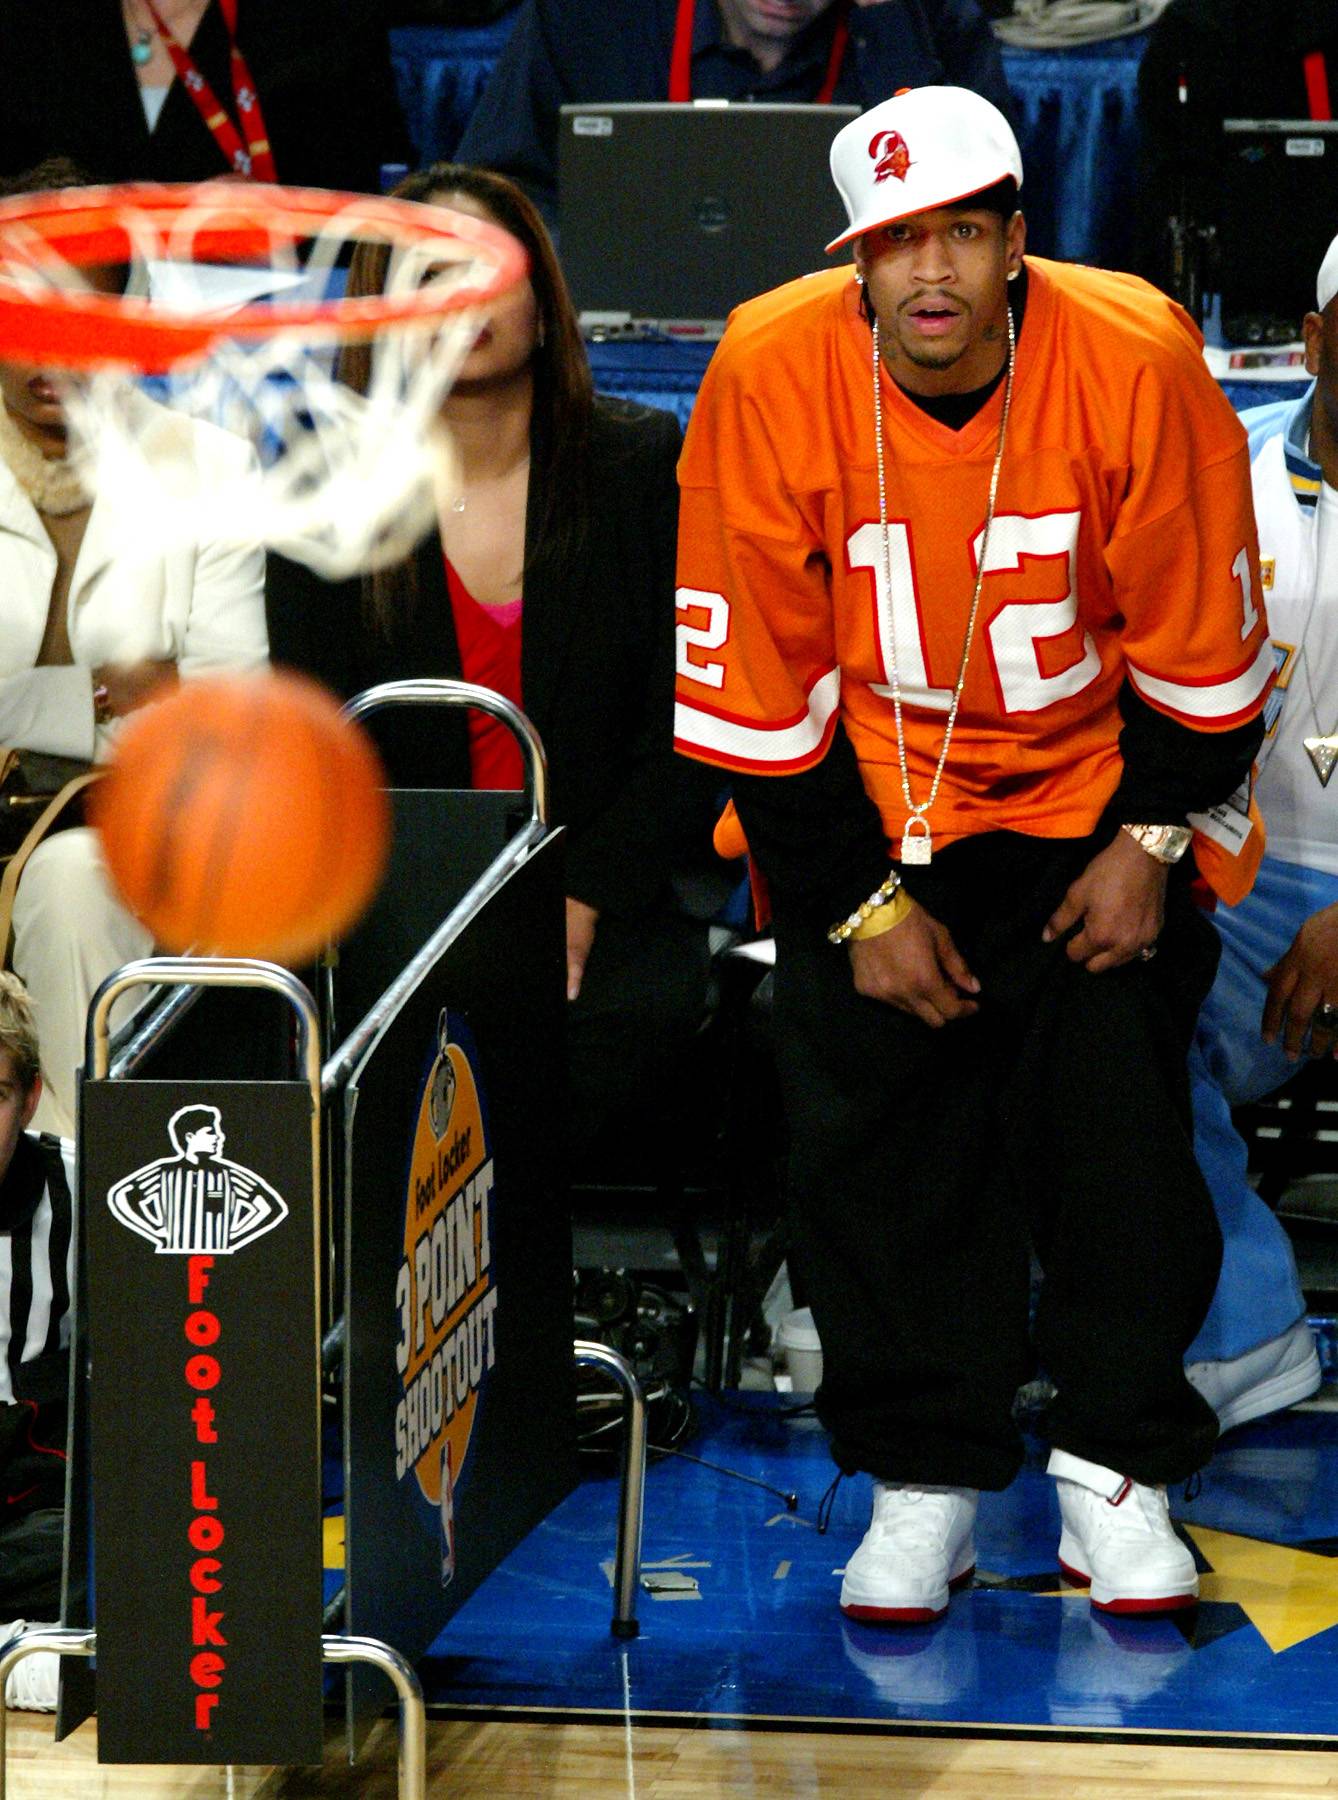 The Future Hall of - Image 1 from The Answer's Best Moments: Happy Birthday  to Allen Iverson!